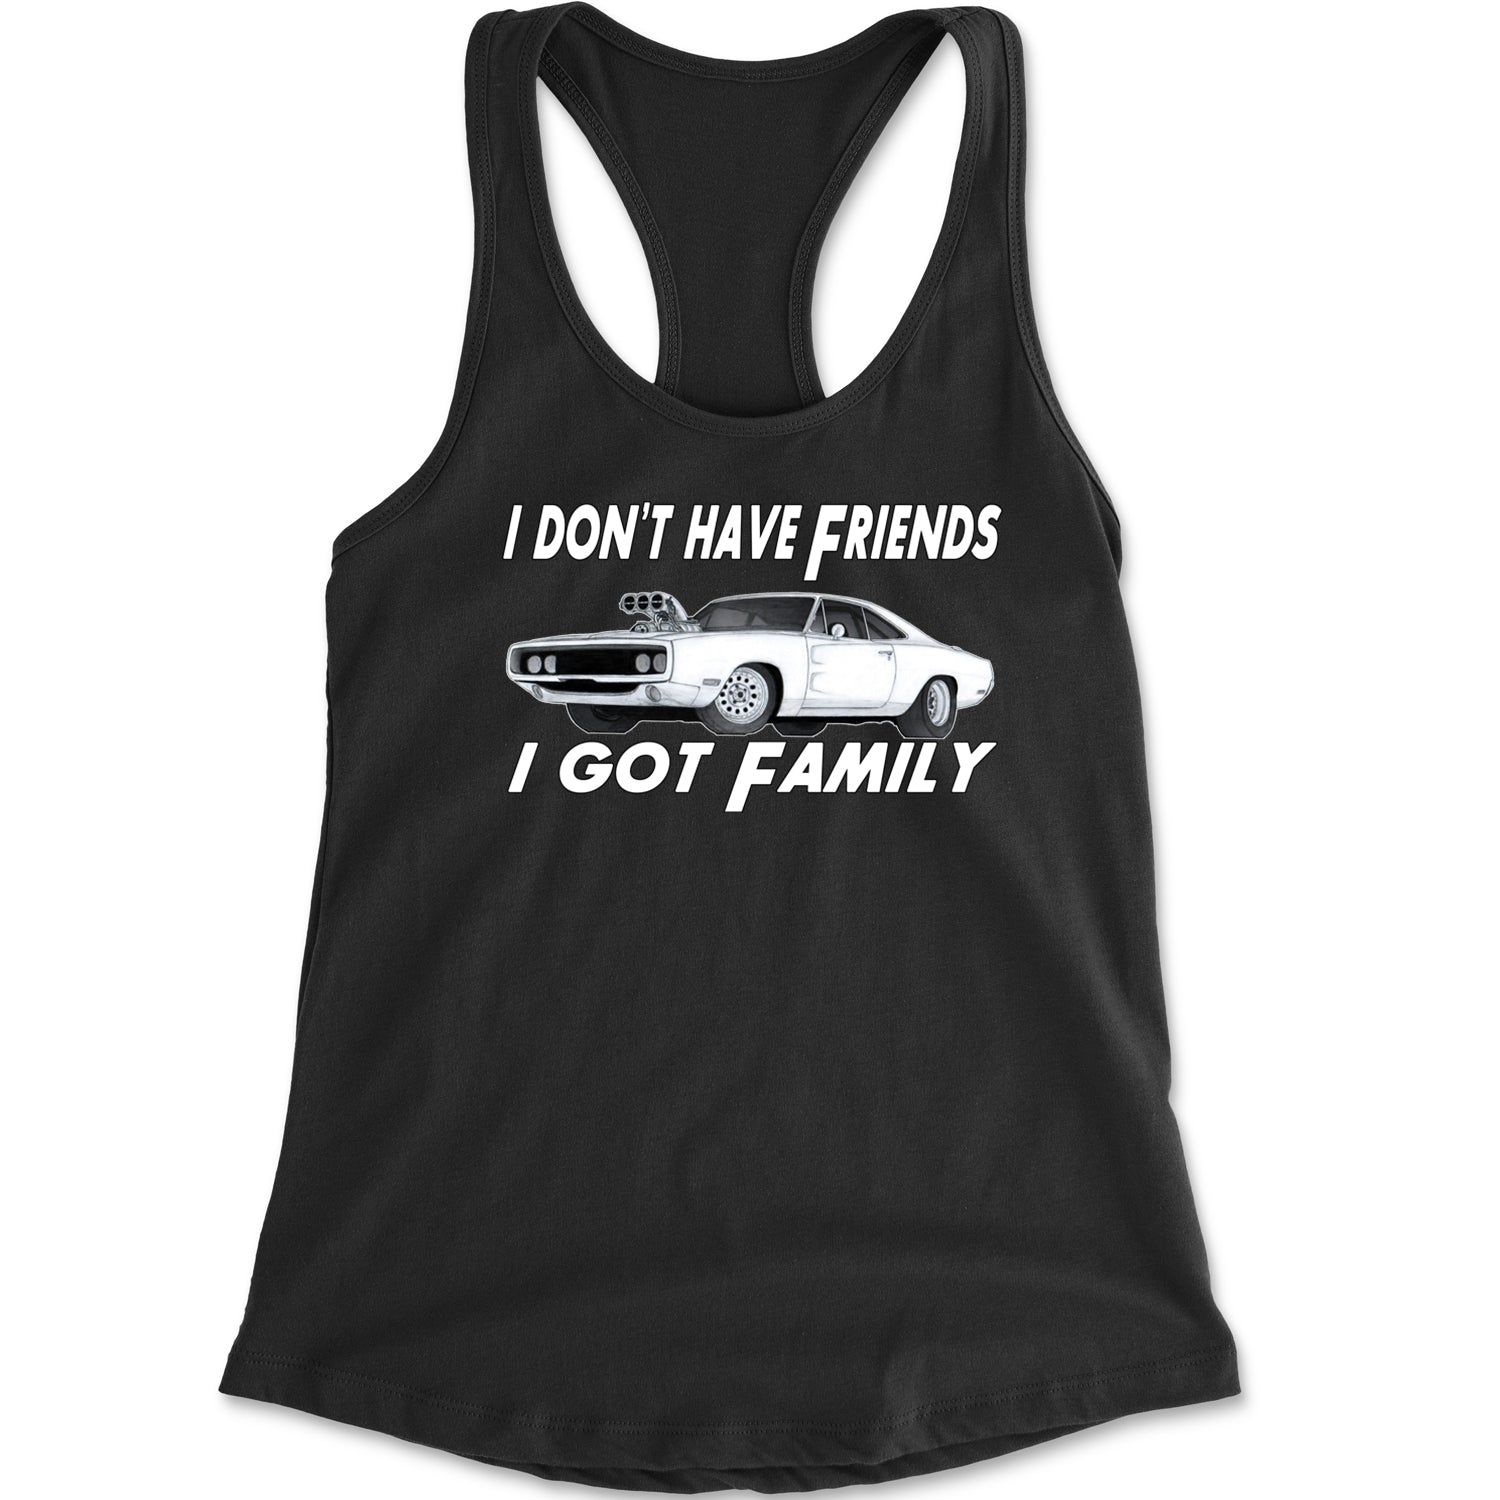 I Don't Have Friends I Got Family  Racerback Tank Top for Women